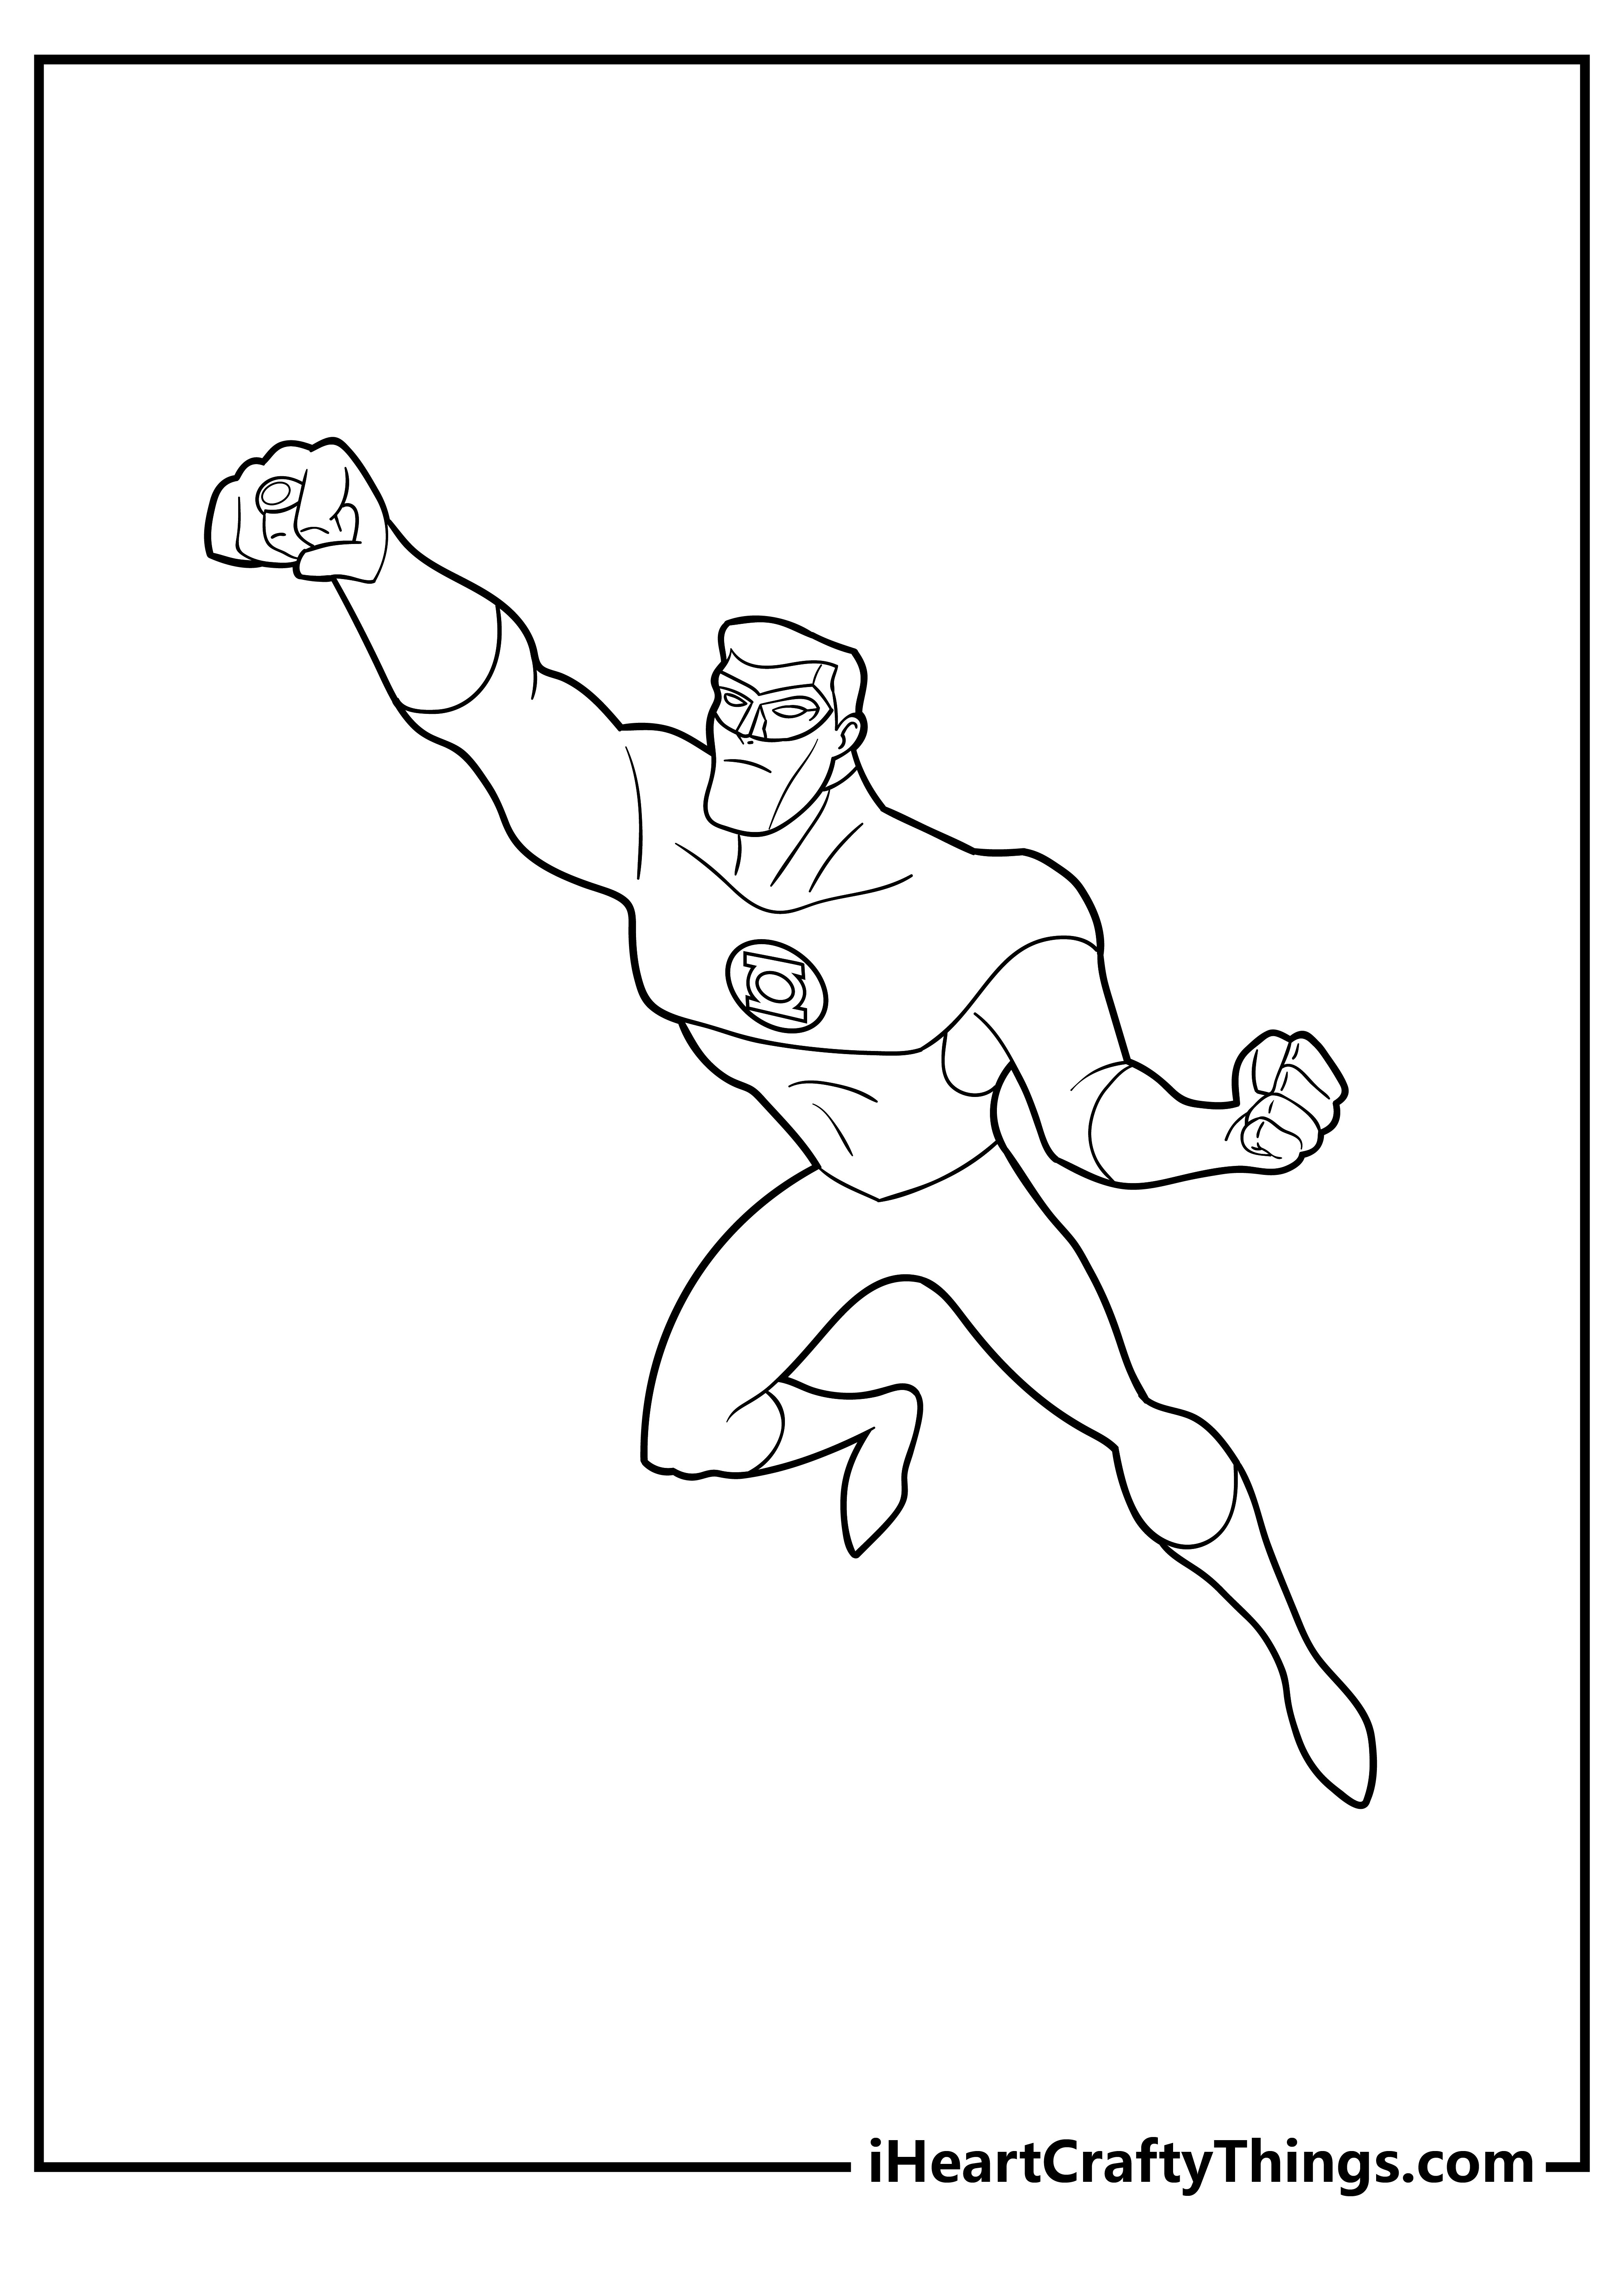 Superheroes Coloring Pages for preschoolers free printable